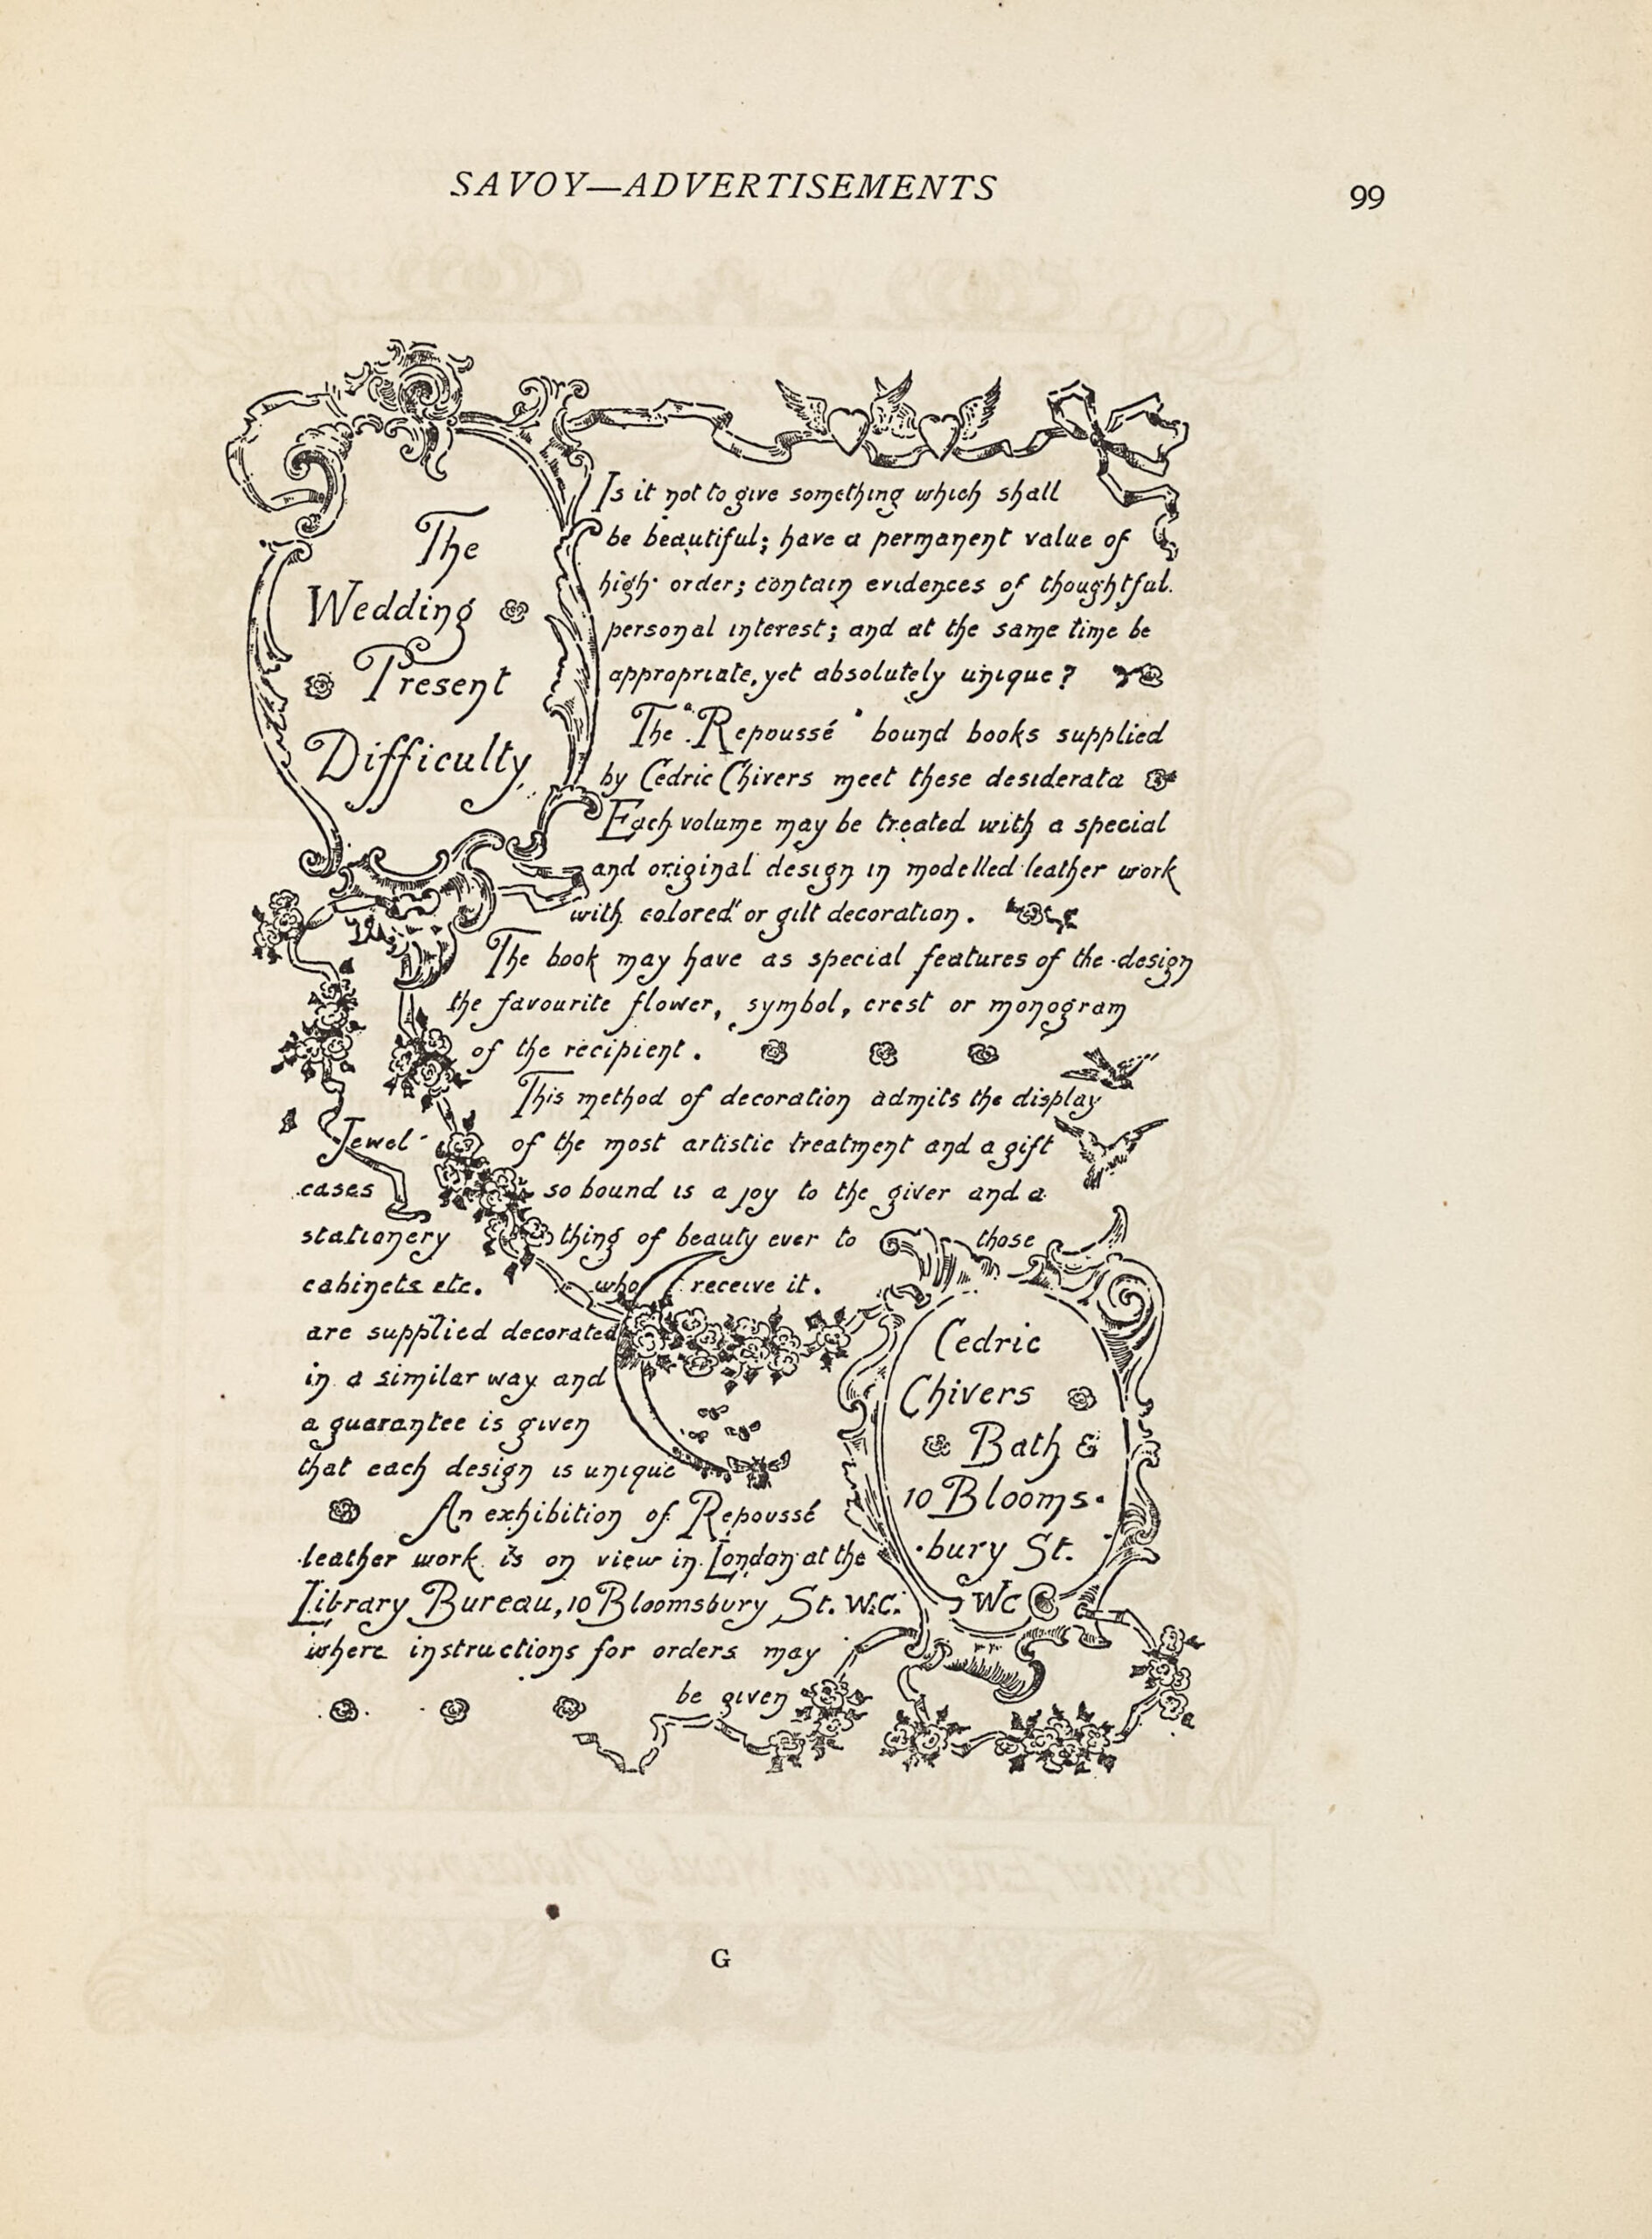 The image is in portrait orientation and printed in black ink. The image is an advertisement titled “The Wedding Present Difficulty” and shows two sections of advertising copy in addition to the title and advertiser’s contact information, with flowers and flourishes dividing up the sections. The advertisement’s title is located in the top left corner of the page, contained within an oval cartouche composed of flourishing ribbons and leavesof flourishing designs, with a rose on either side of the text. These flourishing designs extend out from the top of the oval to frame the image along the top edge and from the bottom of the oval to divide the body text in a curving diagonal line extending from the top left of the image to the bottom right. The diagonal line connects the oval cartouche containing the advertisement’s title to the oval cartouche containing the advertiser’s contact information. These flourishing designs are decorated with winged hearts along the top and several bunches of roses, a crescent moon, and bumblebees along the diagonal. The upper section of the image contains the text: “Is it not to give something which shall be beautiful; have a permanent value of high order; contain evidences of thoughtful personal interest; and at the same time be appropriate, yet absolutely unique? The “Repoussé” bound books supplied by Cedric Chivers meet these desiderata. Each volume may be treated with a special and original design in modelled leather work with colored or gilt decoration. The book may have as special features of the design the favourite flower, symbol, crest or monogram of the recipient. This method of decoration admits the display of the most artistic treatment and a gift so bound is a joy to the giver and a thing of beauty ever to those who receive it.” This section of text is decorated throughout with roses, fleurons, and doves. The lower section of the image, below the diagonal line, contains the text: “Jewel-cases, stationery, cabinets, etc. are supplied decorated in a similar way and a guarantee is given that each design is unique. An exhibition of Repoussé leather work is on view in London at the Library Bureau, 10 Bloomsbury St. W.C. where instructions for orders may be given.” This text is interspersed with several roses. At the bottom right of the image is a second oval cartouche outlined in flourishing designs, similar to the first, containing the advertiser’s contact information, which reads: “Cedric Chivers Bath & 10 Bloomsbury St. WC.”